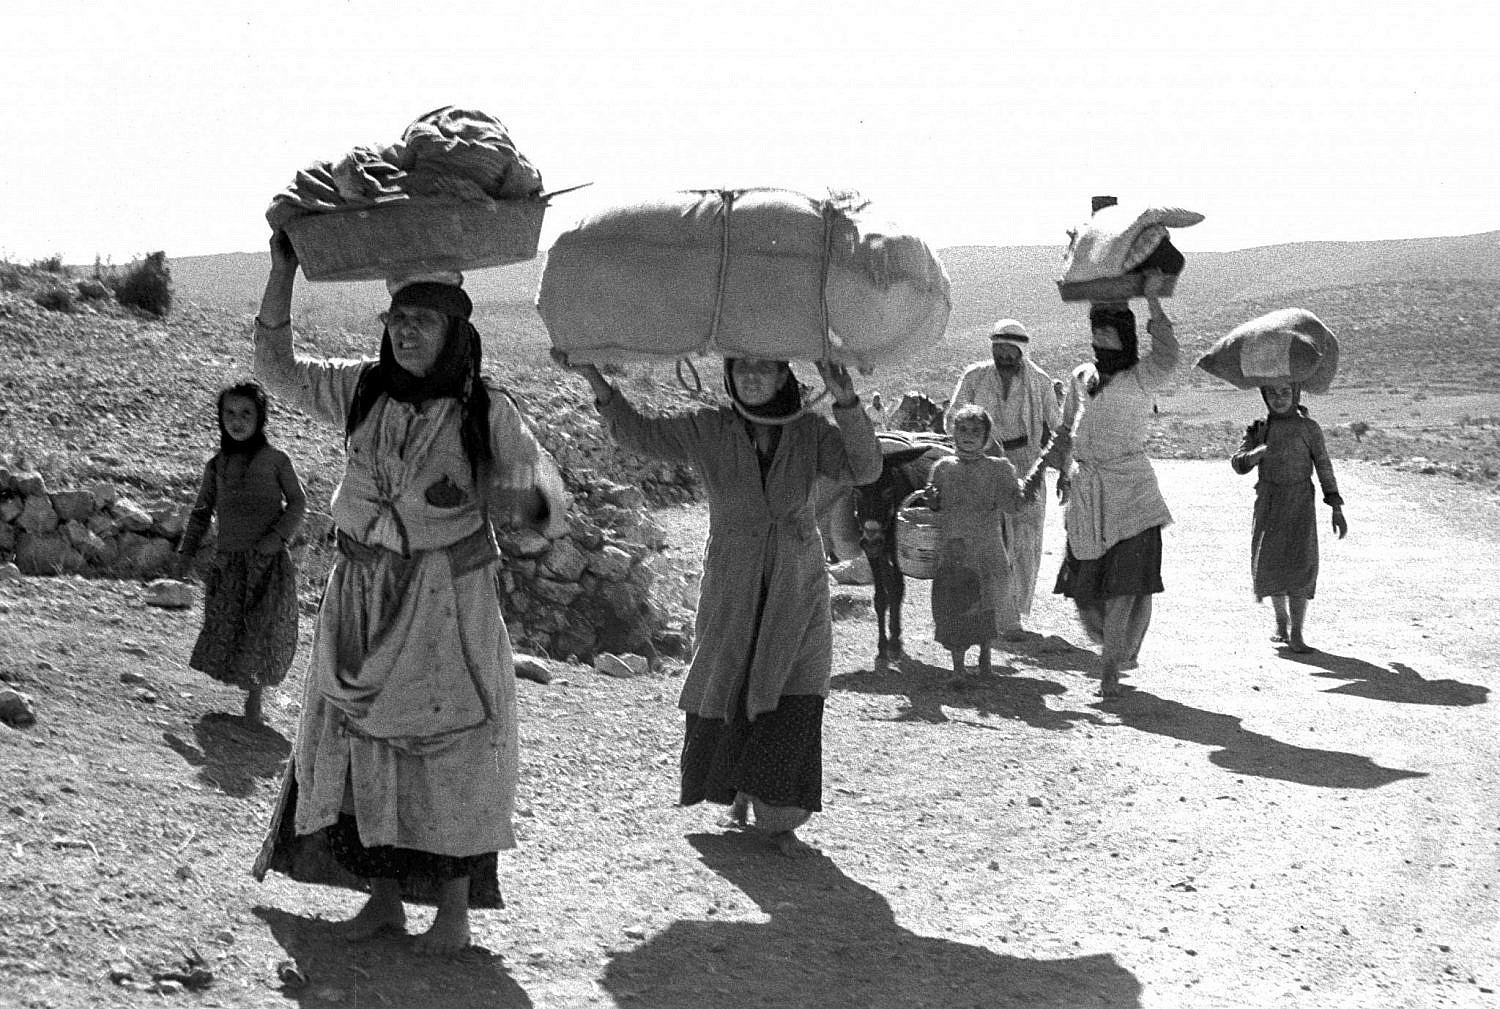 Palestinians flee their village in the Galilee after the entry of Zionist forces, 1948. (GPO)